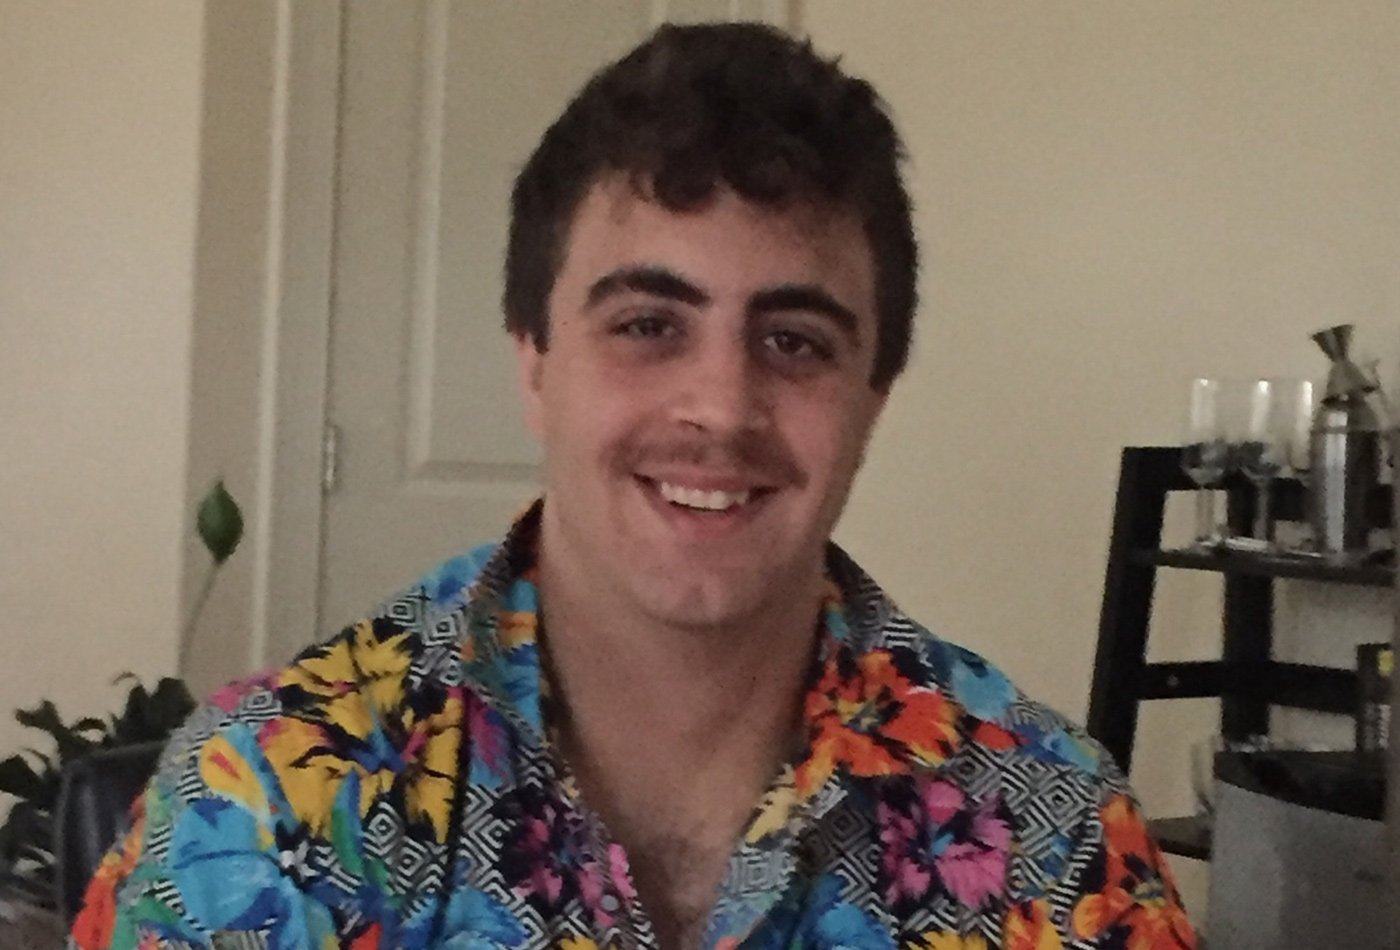 A male graduate student smiles while wearing a tropical shirt.